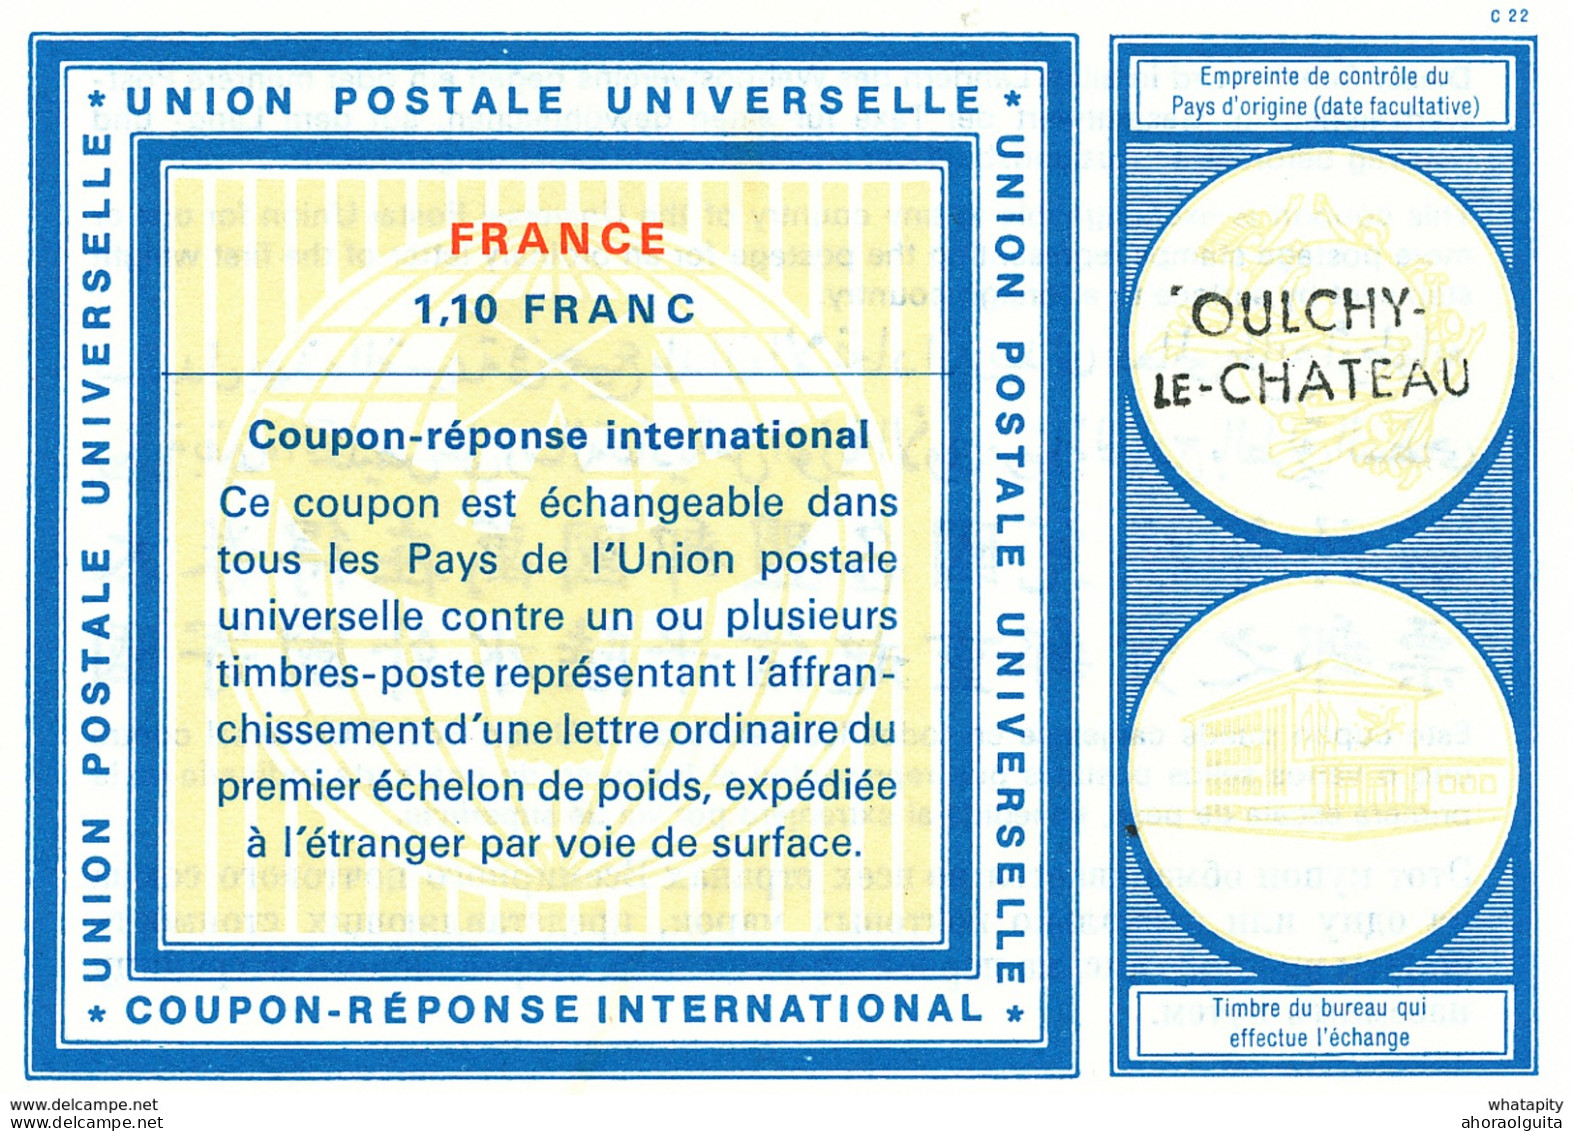 DT 388 -- FRANCE Coupon Réponse International ( IRC) 1.10 Francs  - Griffe OULCHY LE CHATEAU - Reply Coupons